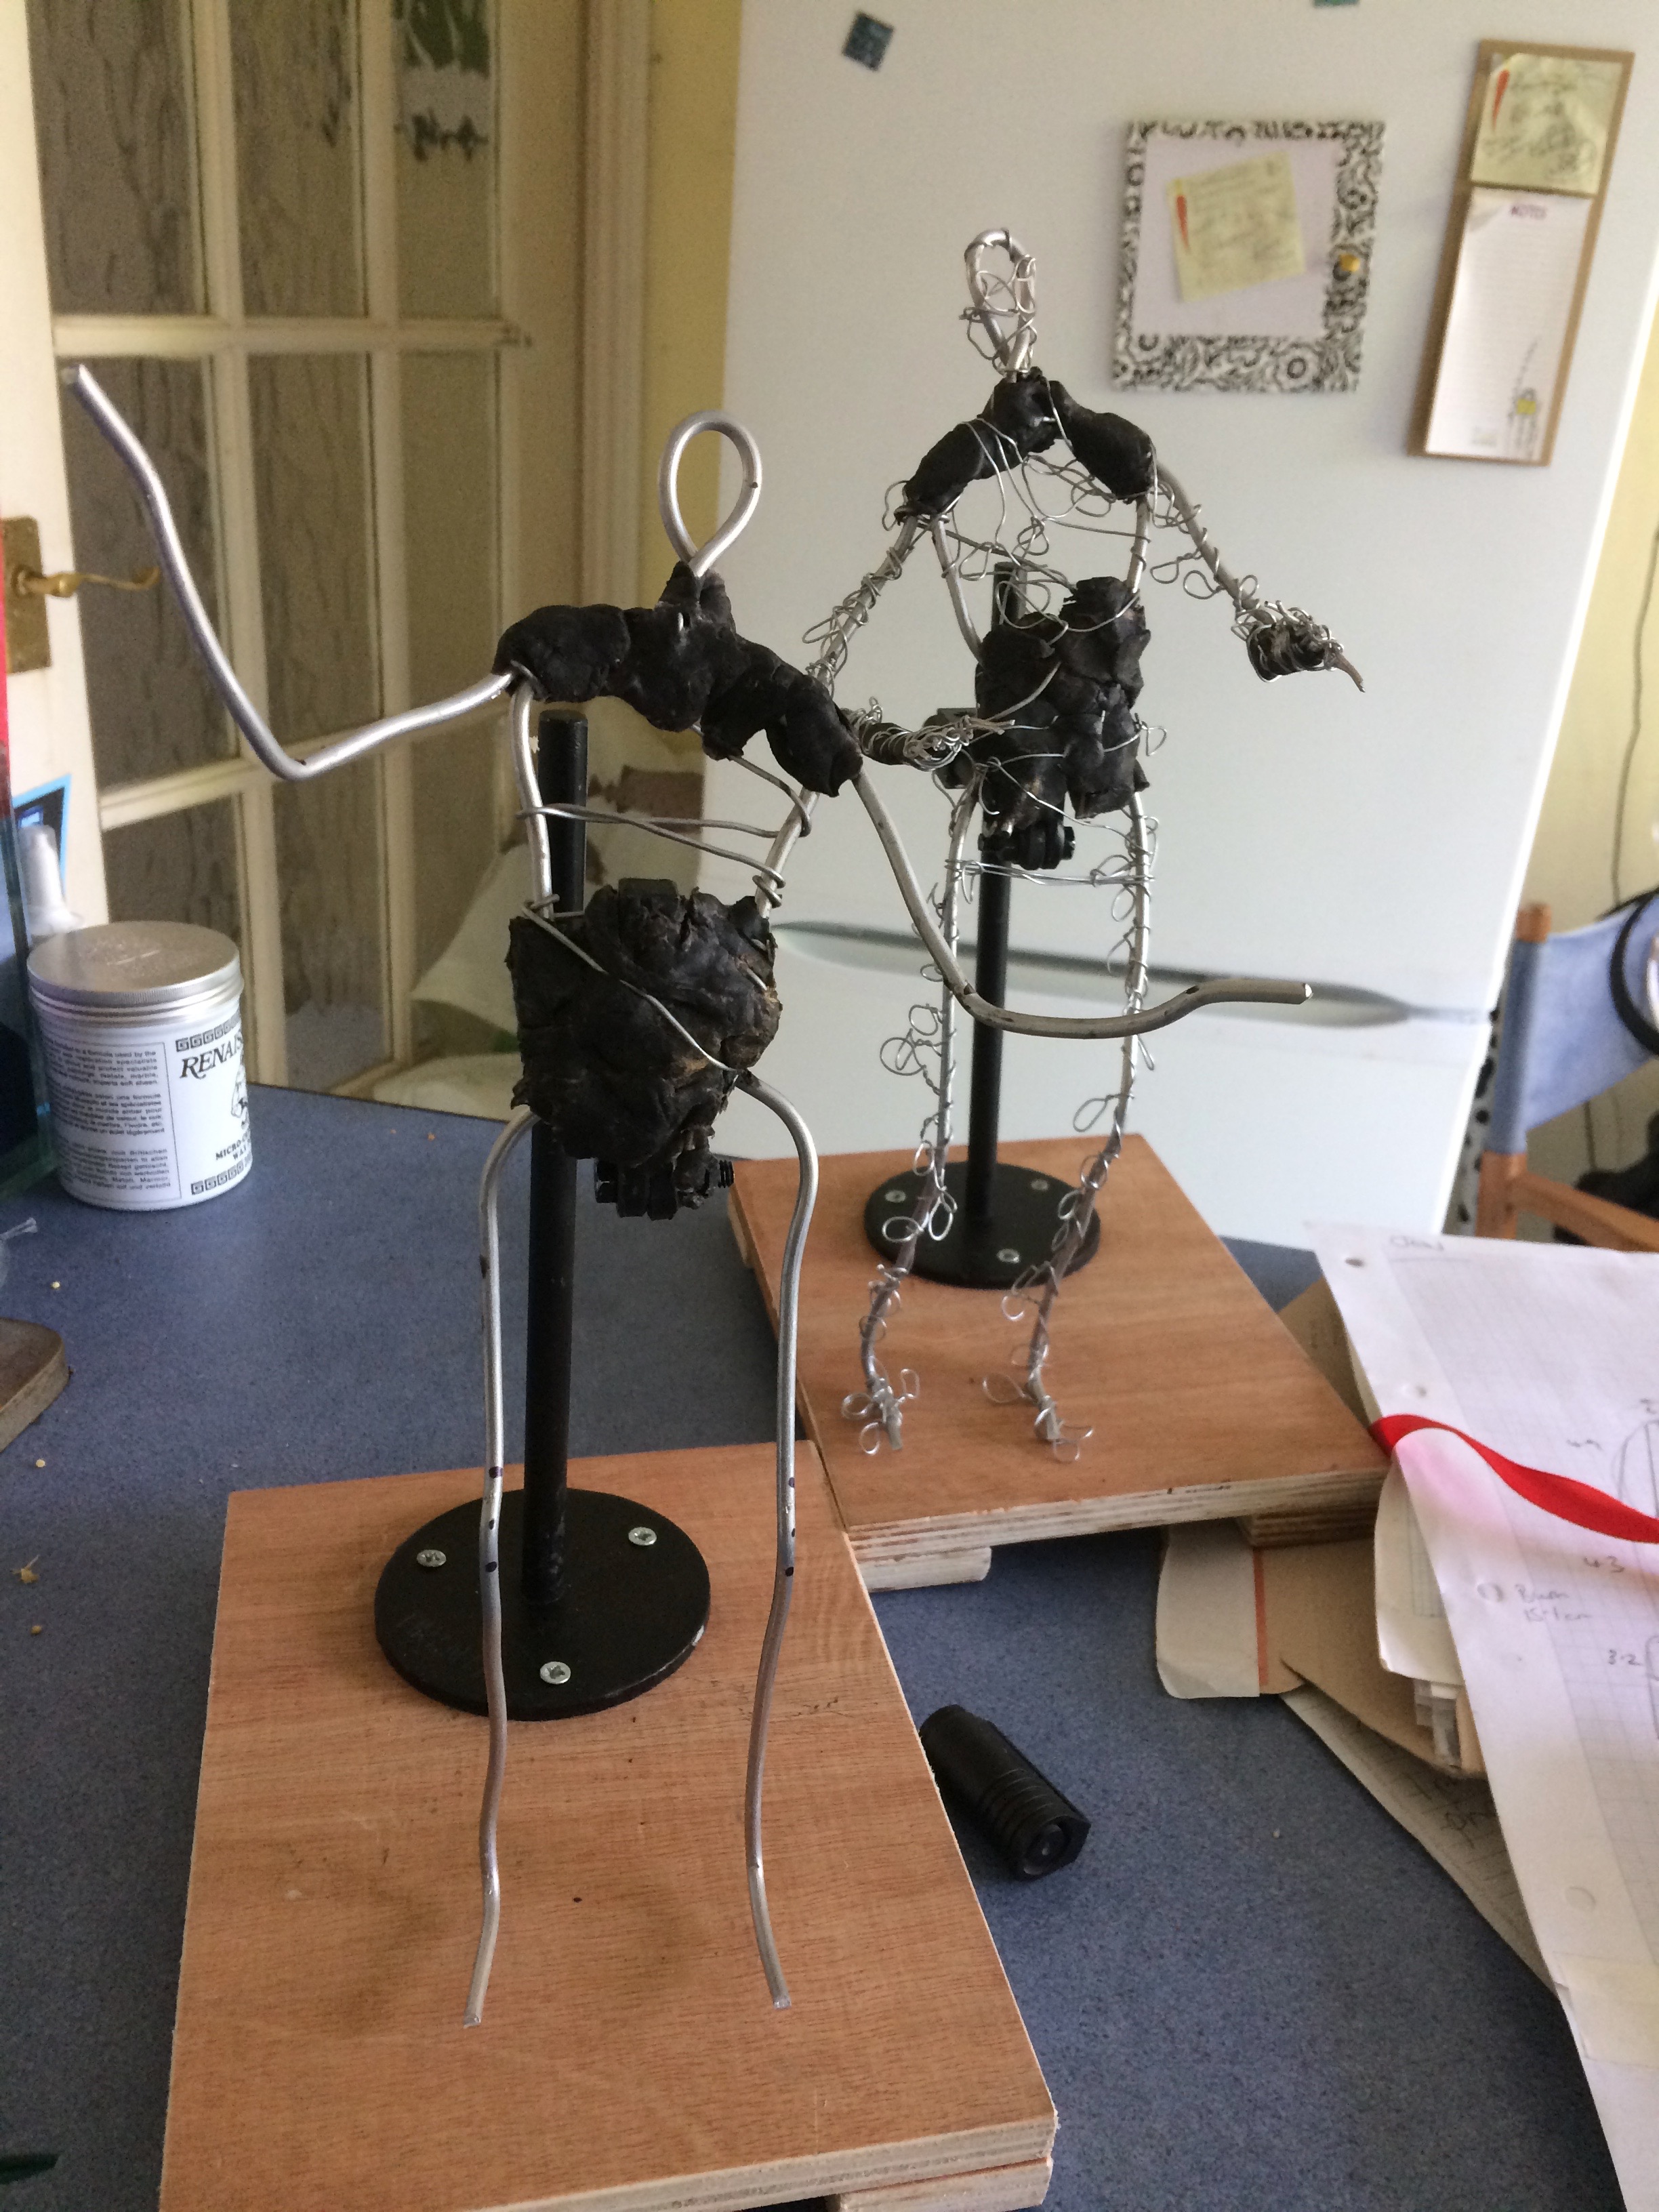 Small figure armatures for the Cracker Packer maquette